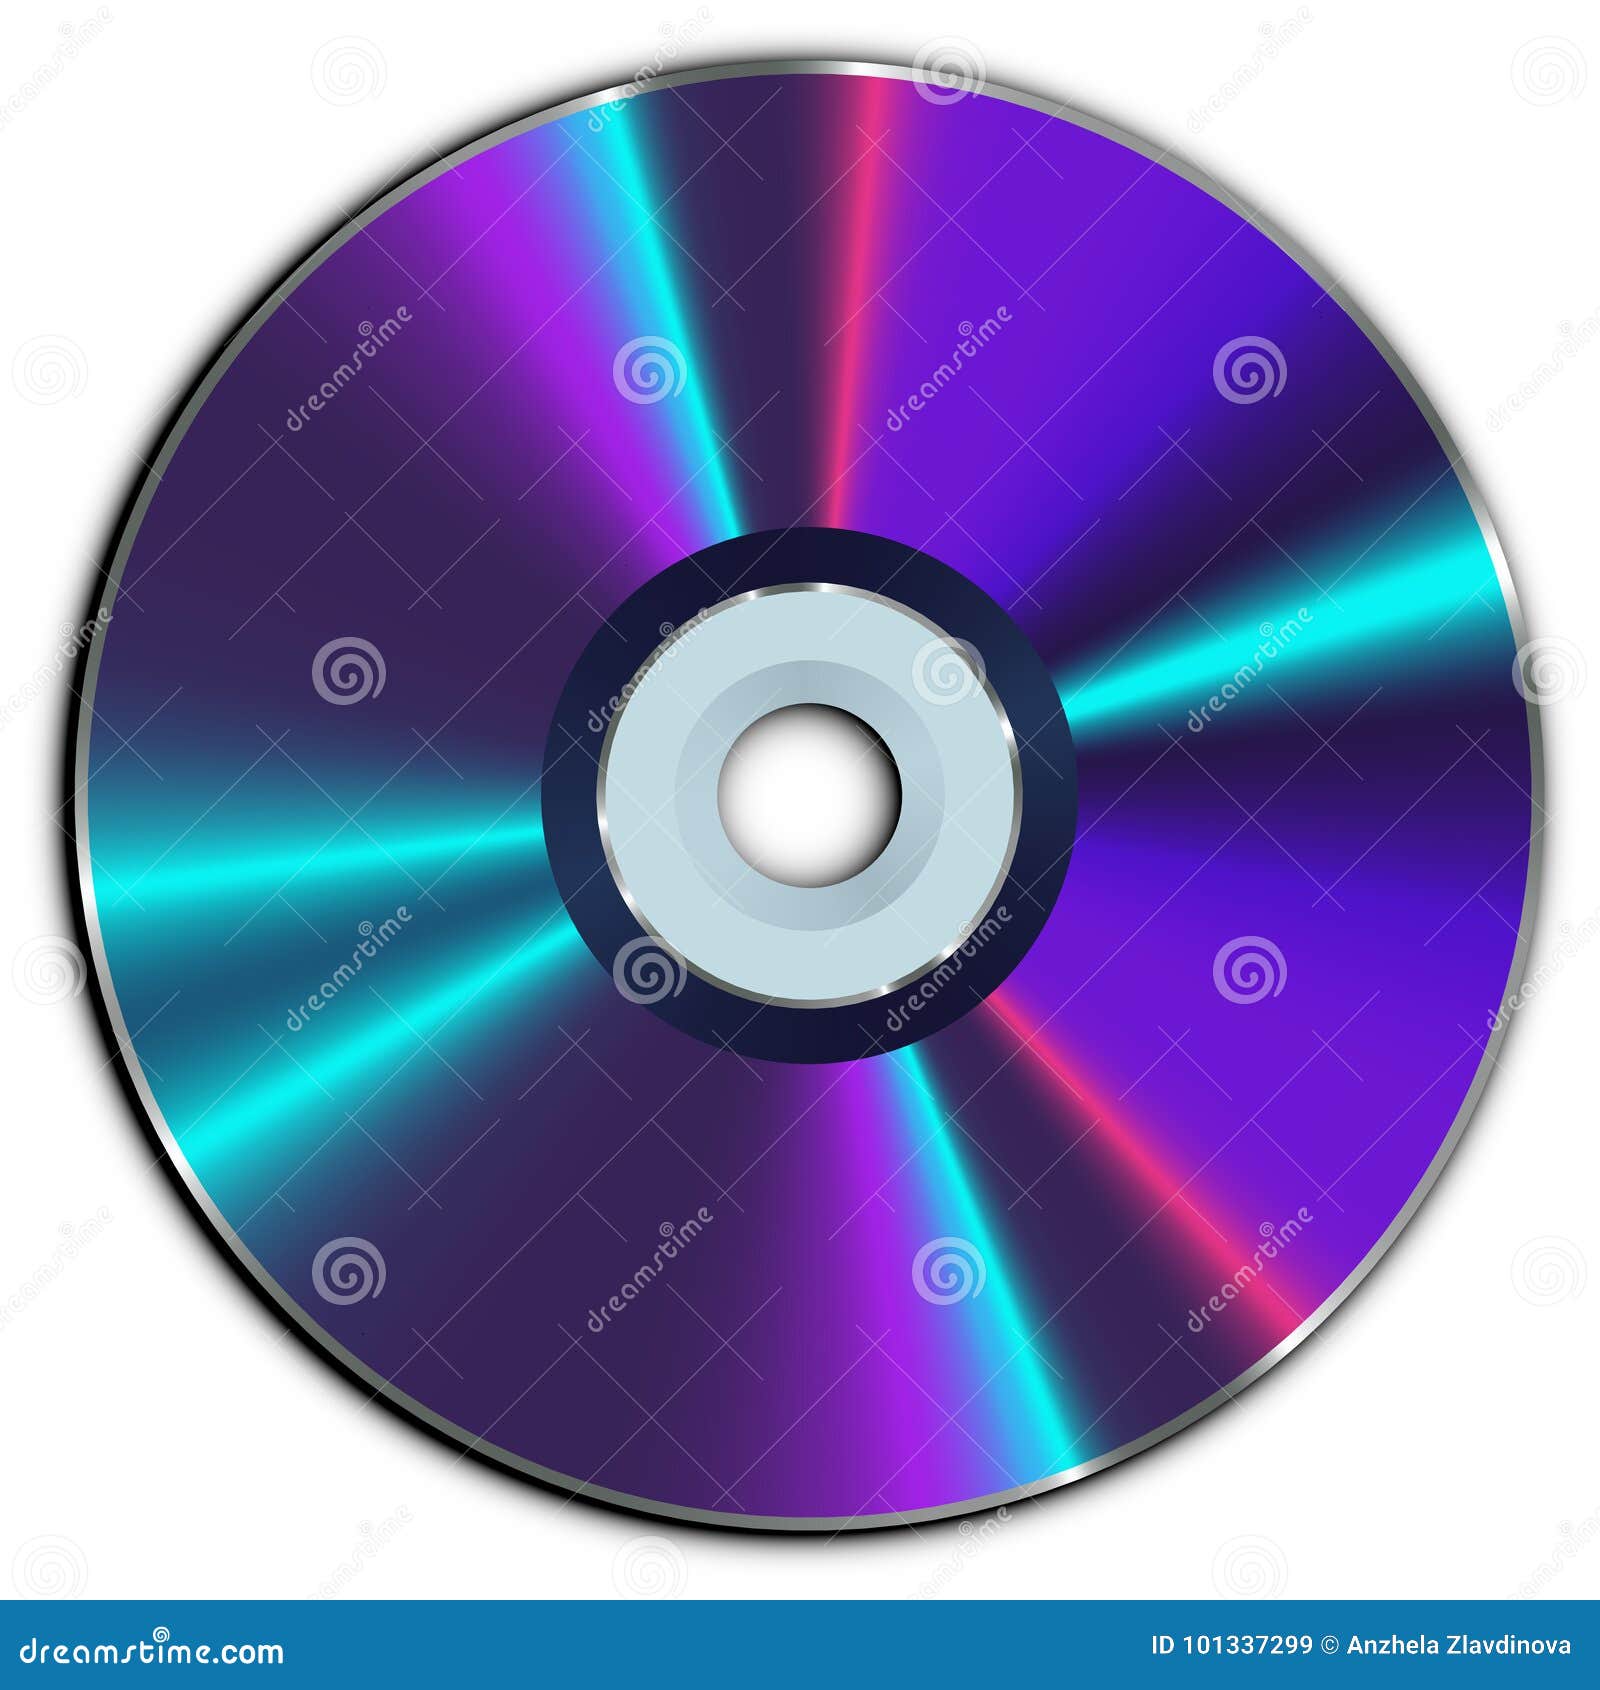 Compact CD or DVD disc stock vector. Illustration of color - 101337299